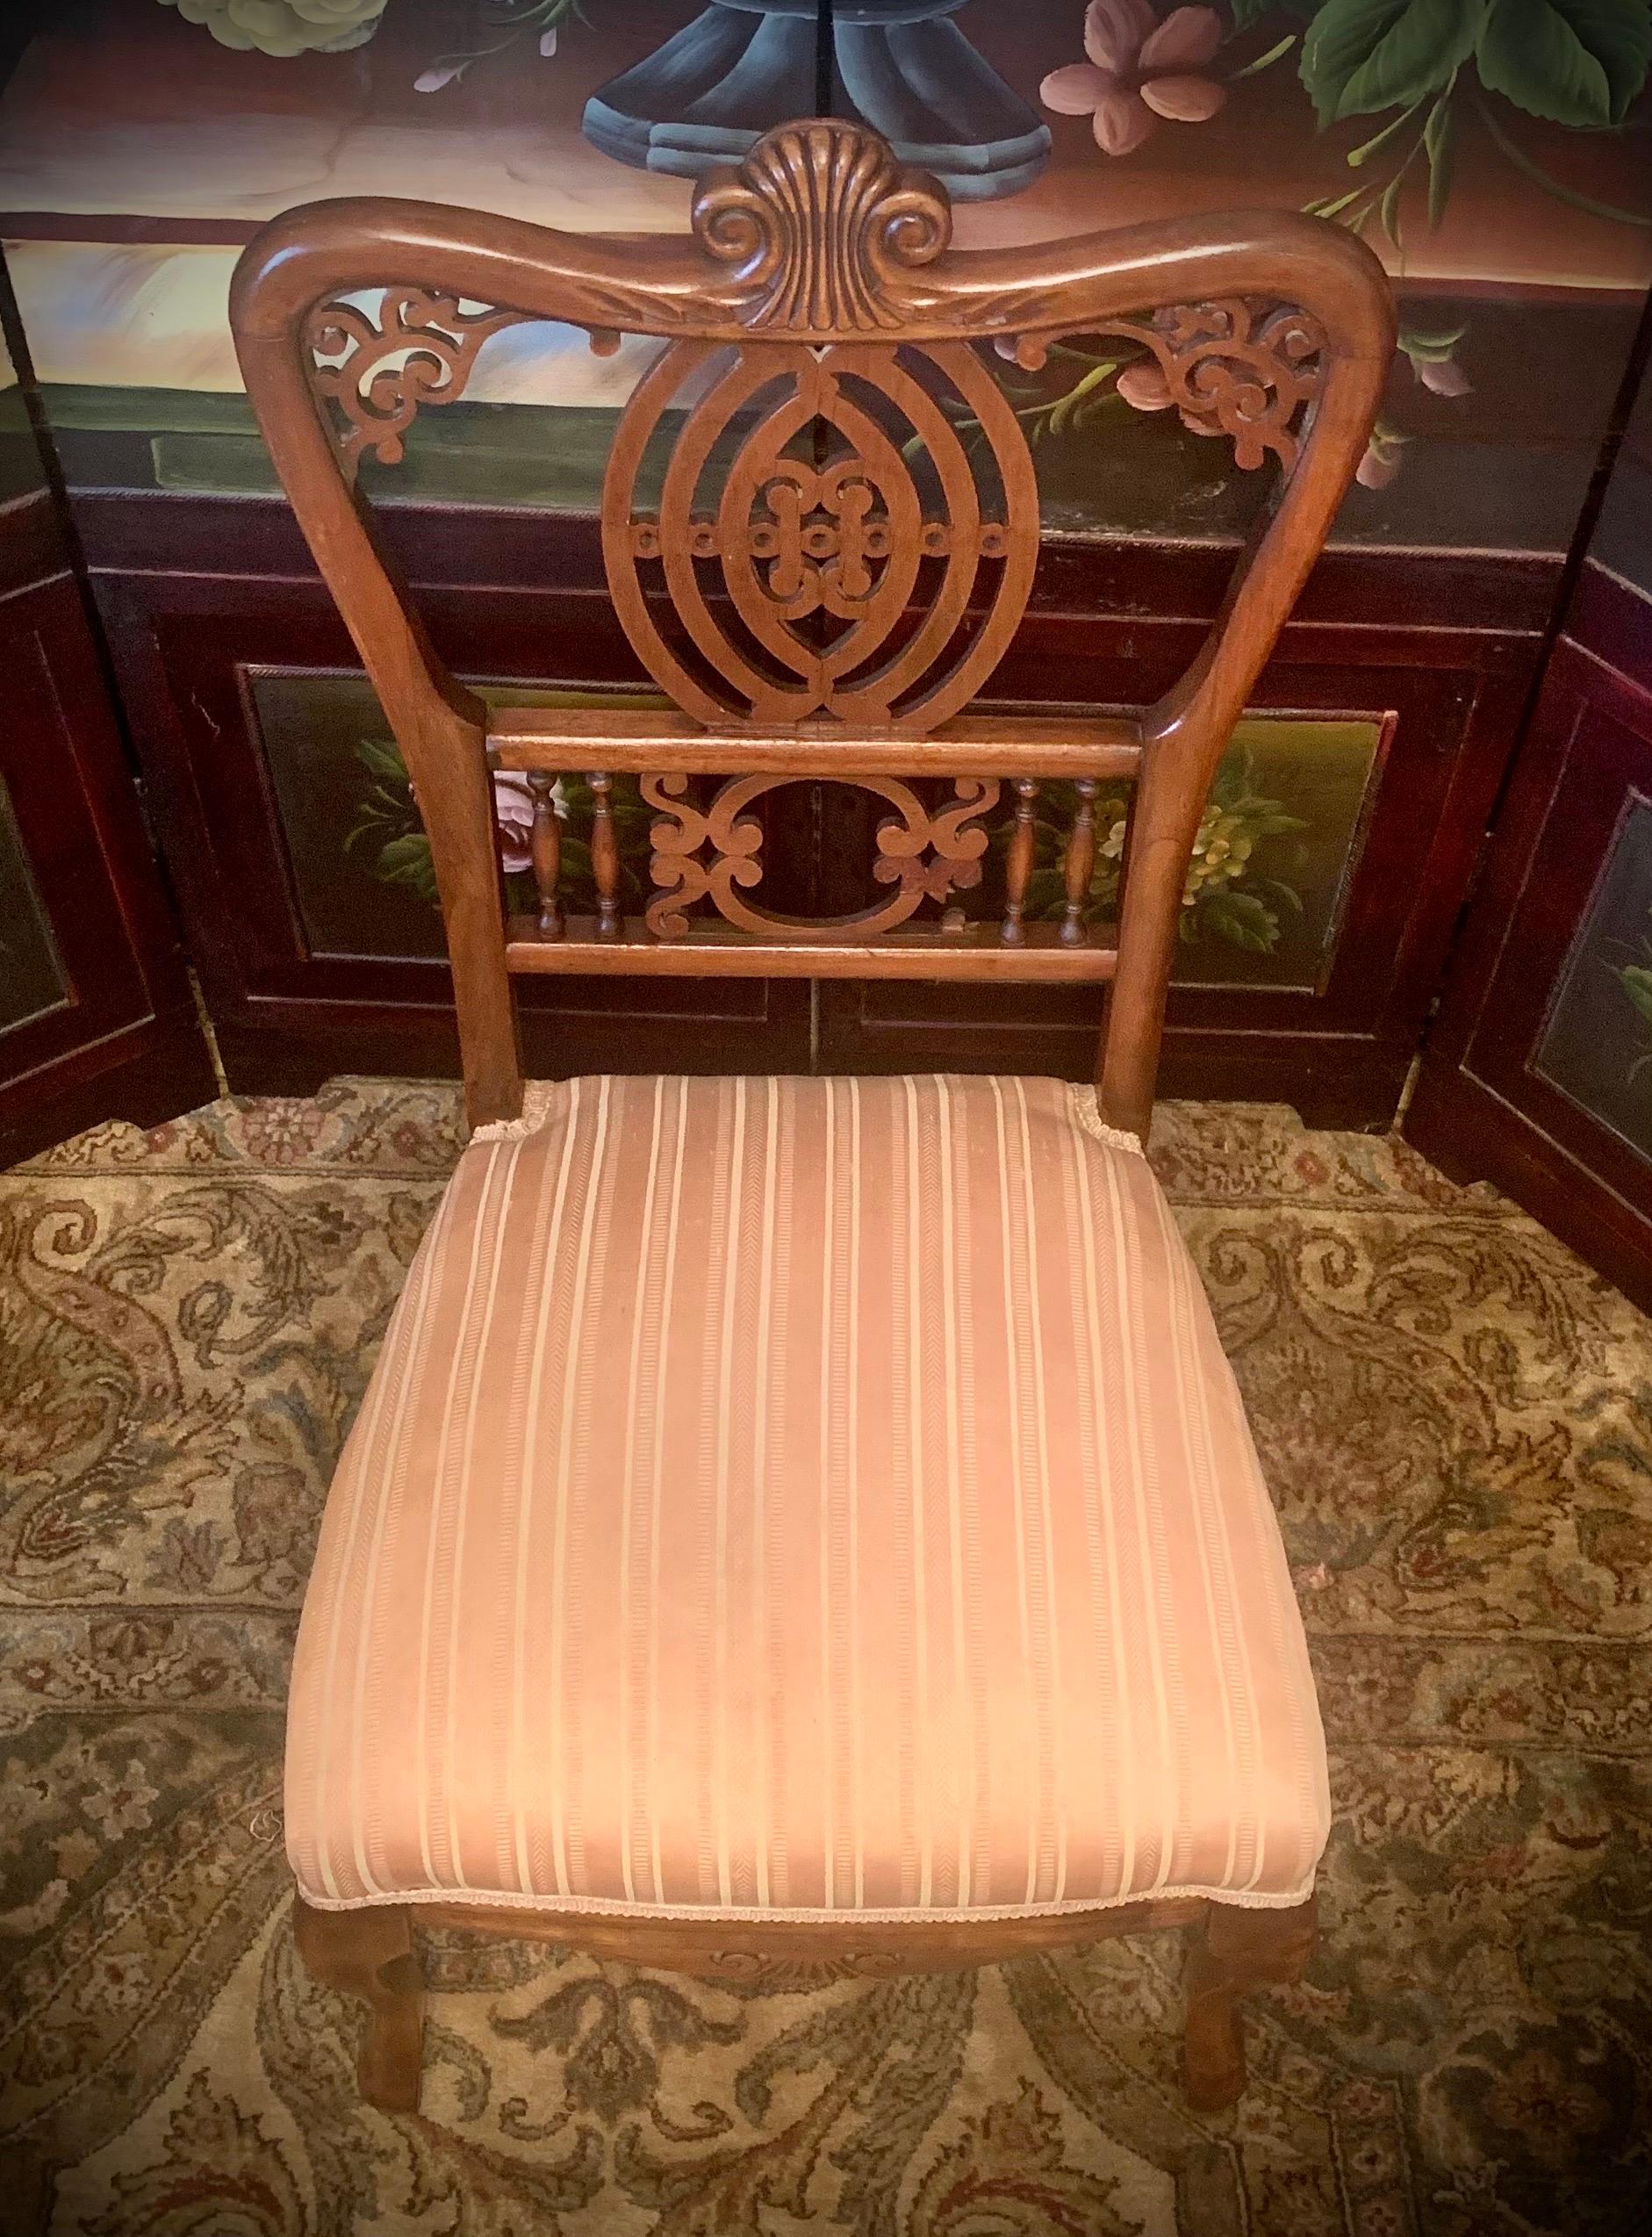 Circa 1890-1910 this antique Victorian slipper chair is American made and constructed of solid, smooth mahogany with ornately carved wood plane detail, lathe-fashioned spindles, cabriole legs, and a lowered seat.  The blush pink and cream striped